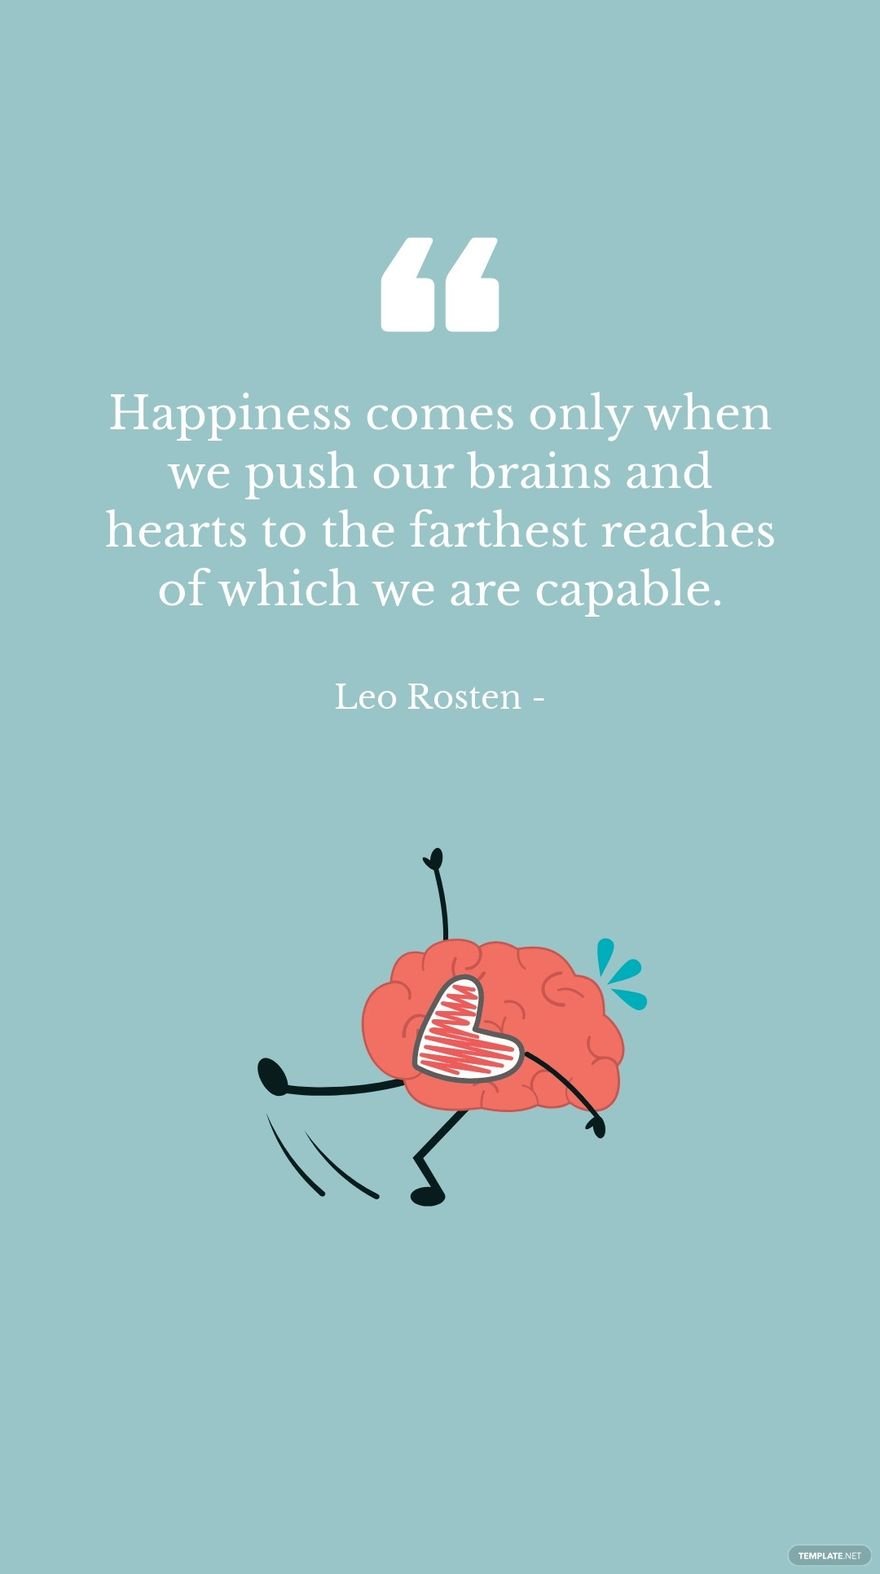 Leo Rosten - Happiness comes only when we push our brains and hearts to the farthest reaches of which we are capable. in JPG